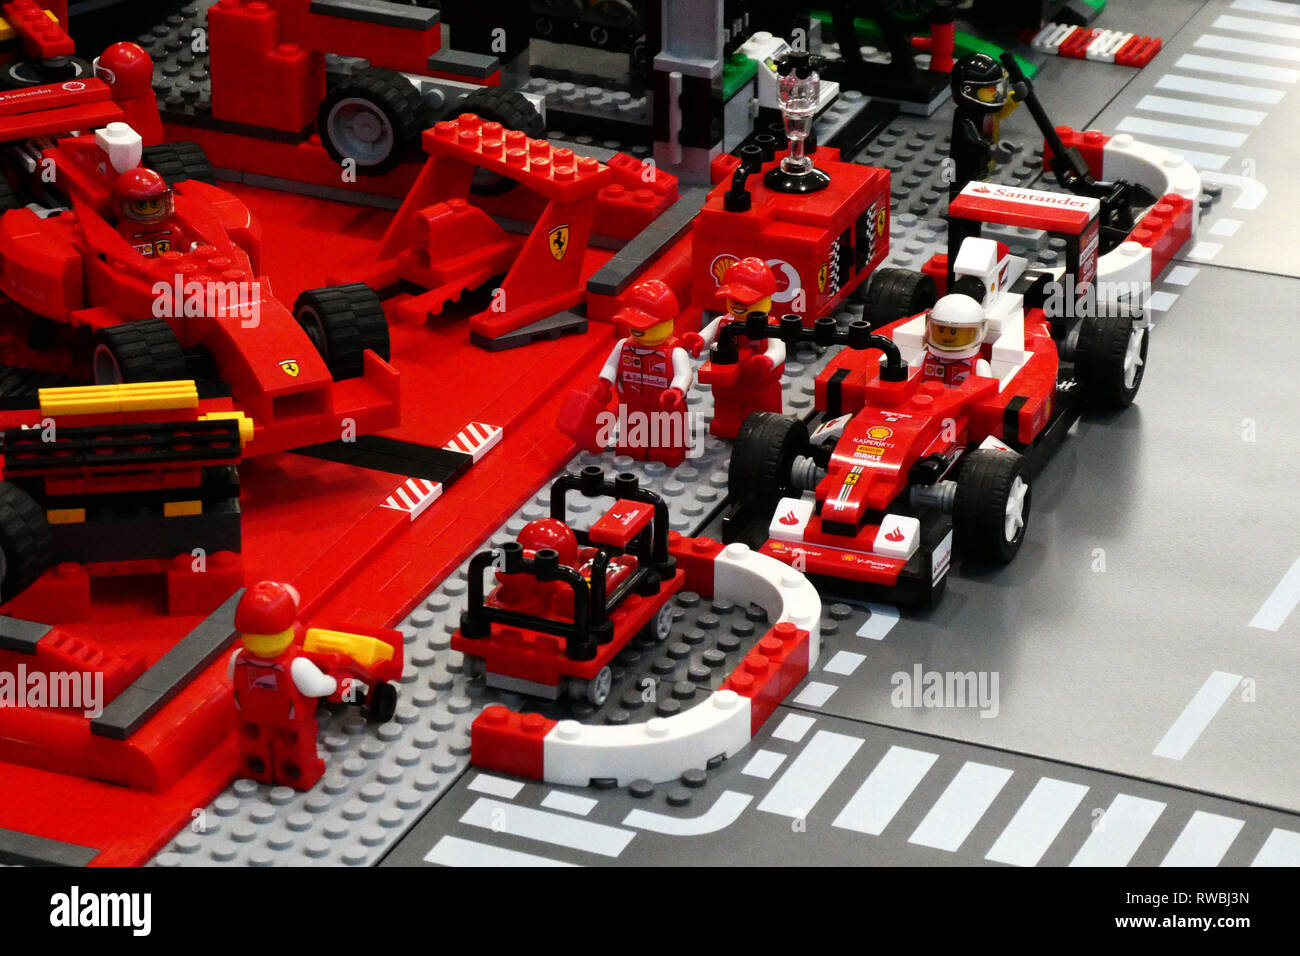 Lego exhibition, Ferrari F1 refueling at the stand, Saint-Privat